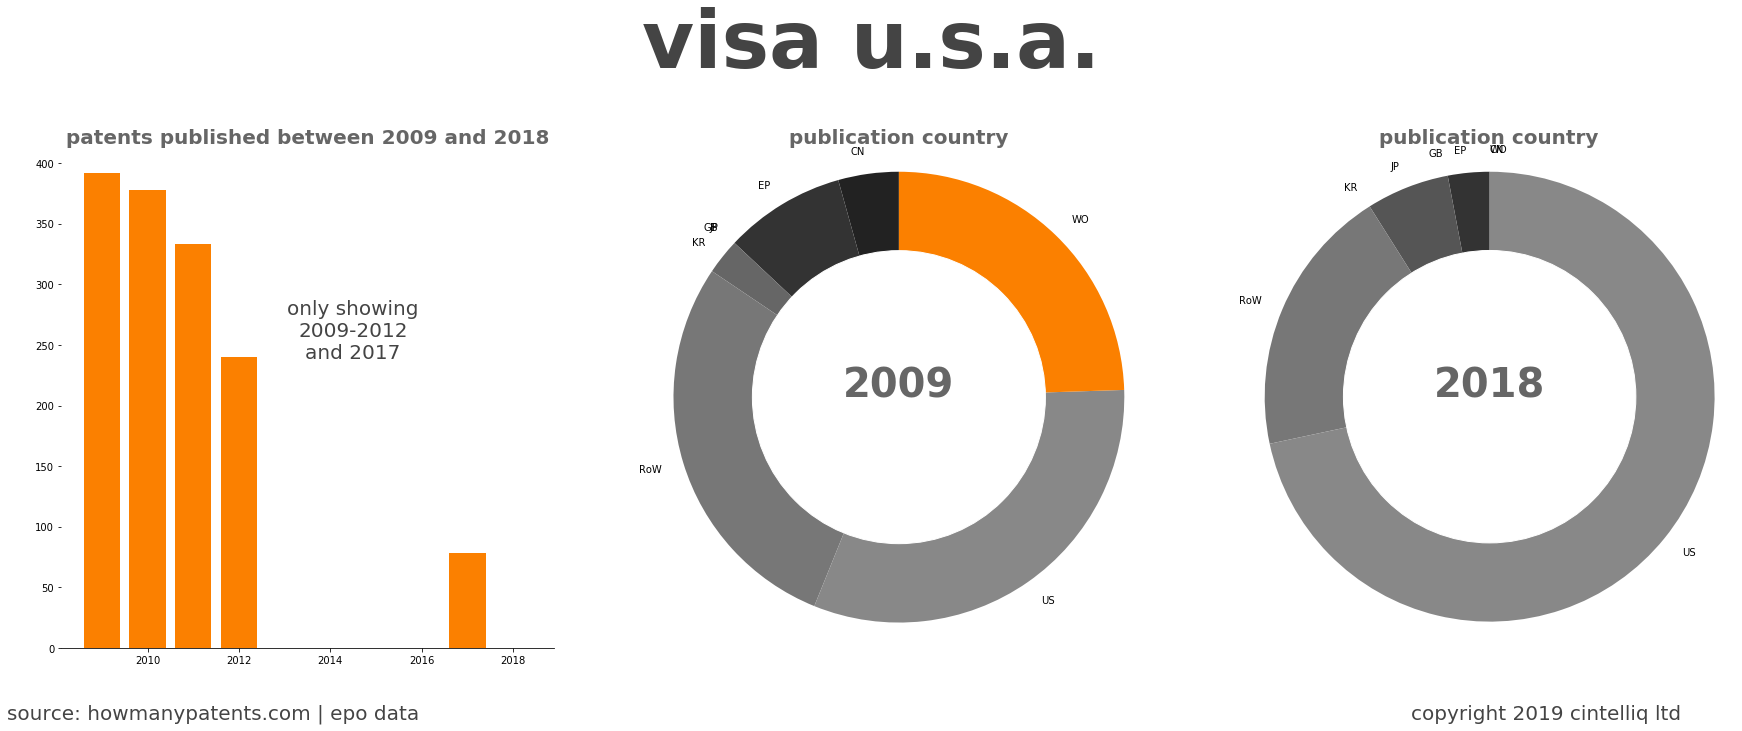 summary of patents for Visa U.S.A.